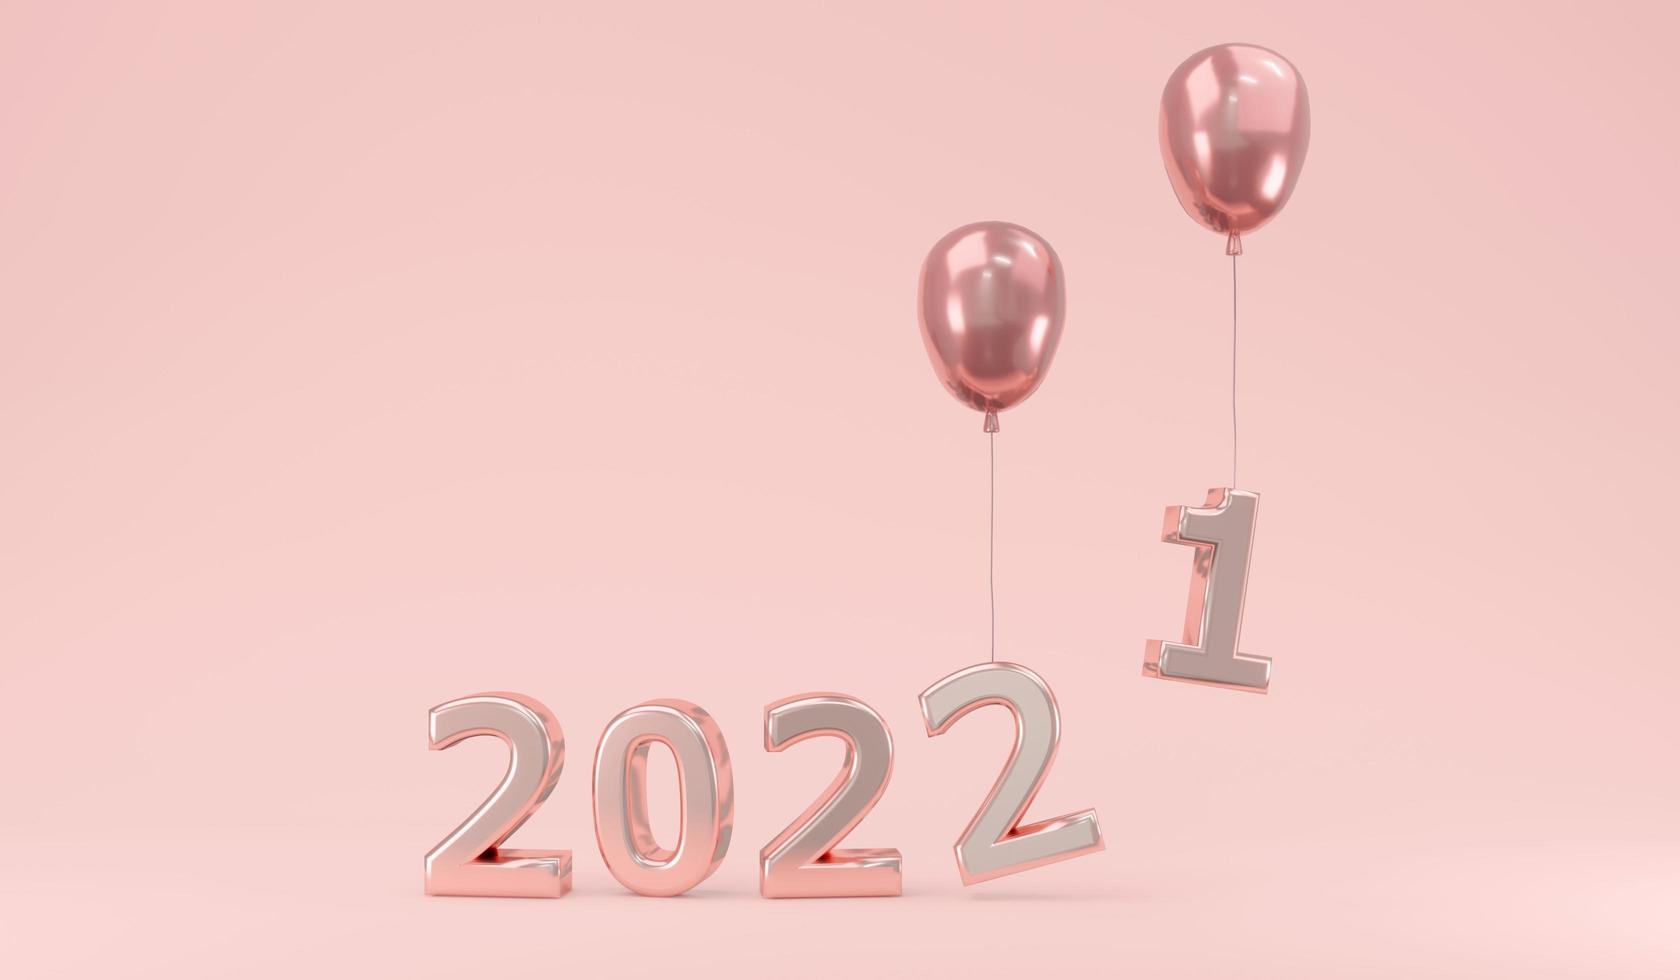 3D Rendering 2022 pink decoration changing from 2021 to 2022 concept of happy new year holiday background. 3D Render illustration. photo